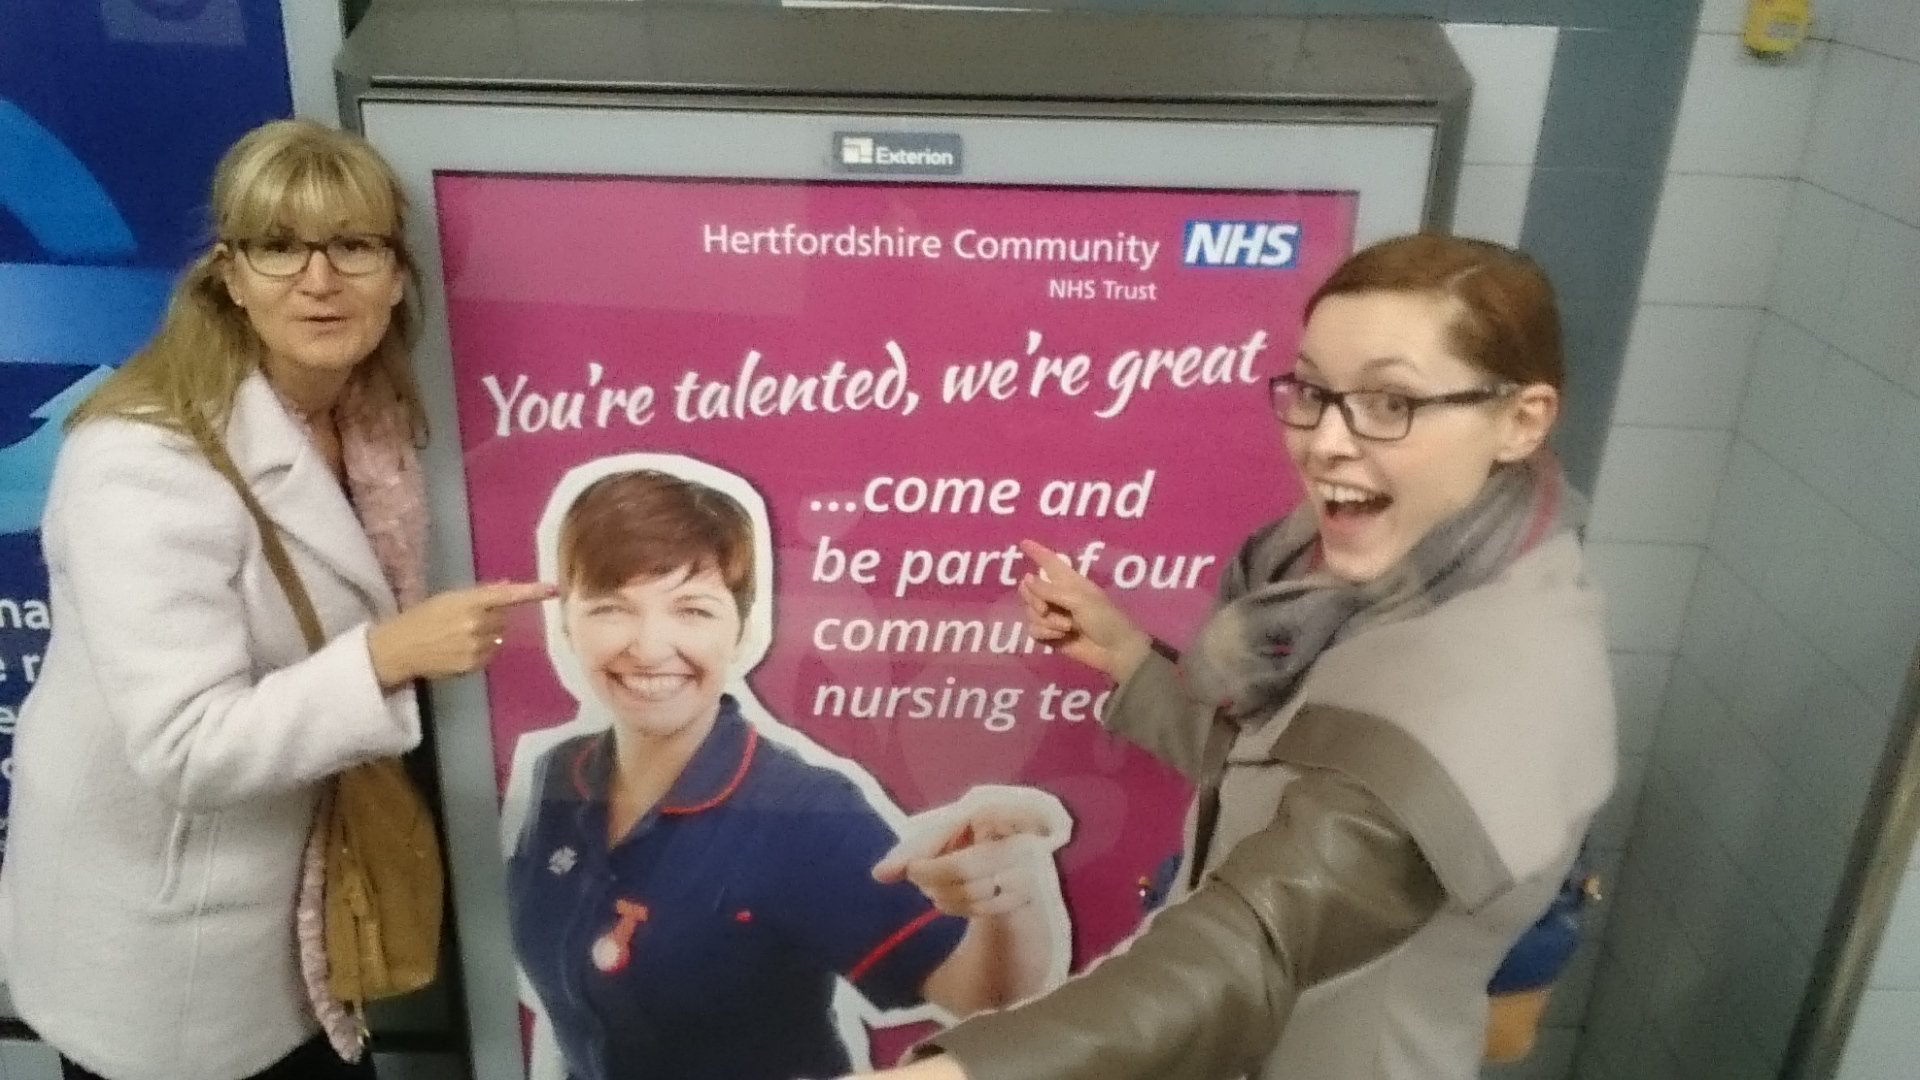 A prize selfie to promote nursing jobs featured image